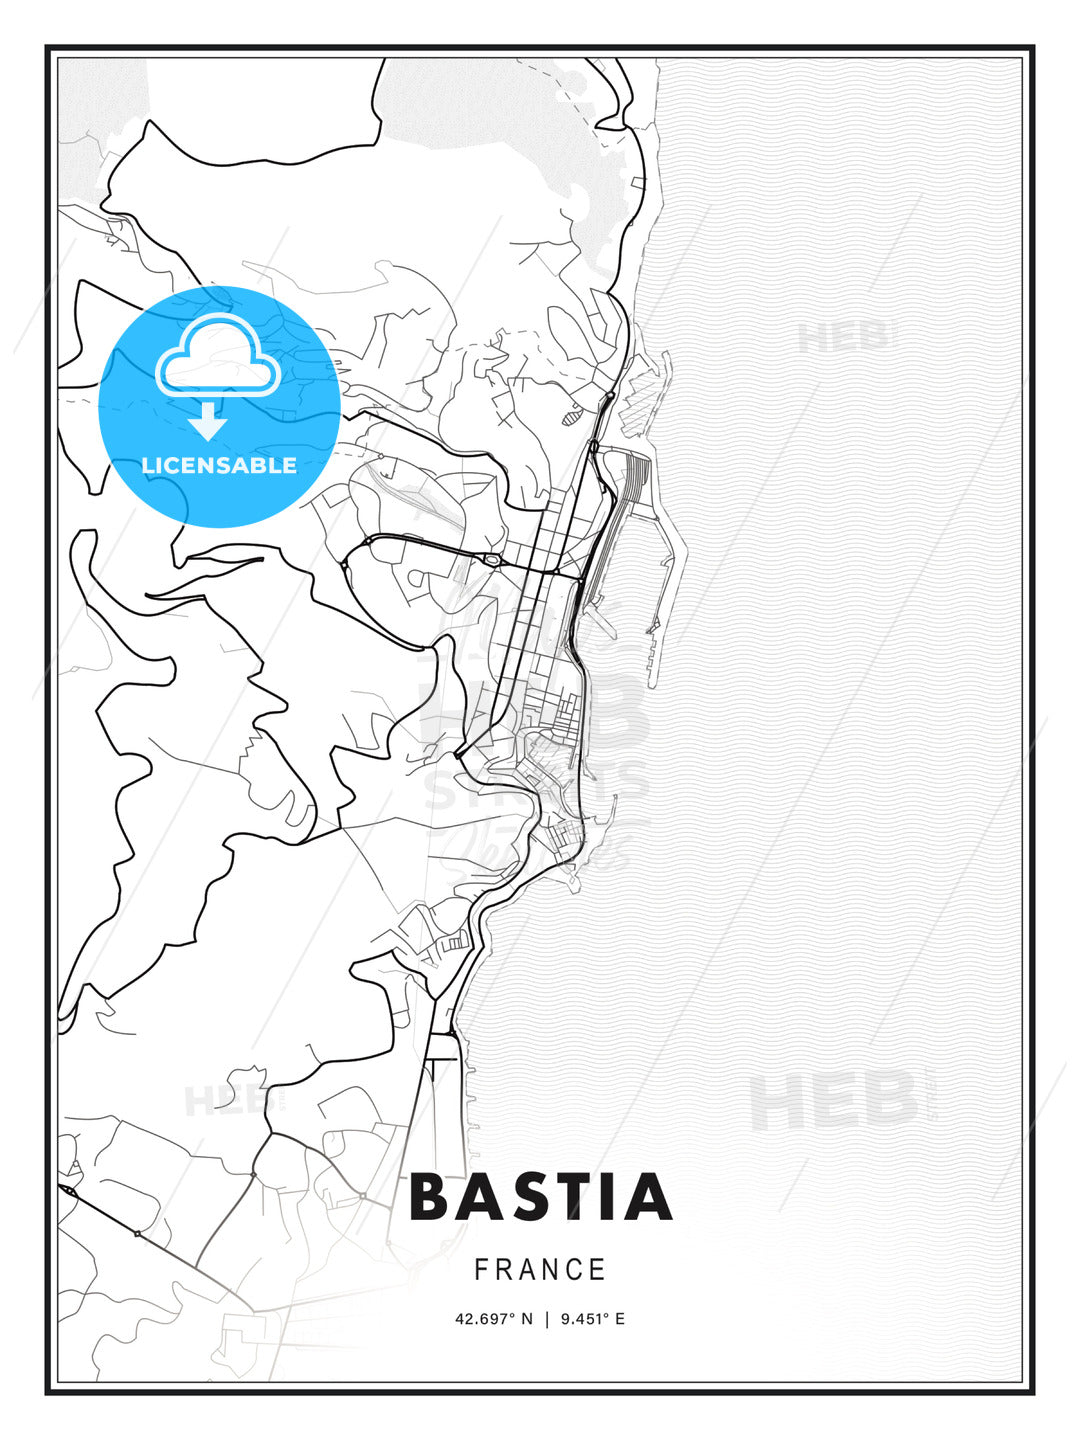 Bastia, France, Modern Print Template in Various Formats - HEBSTREITS Sketches